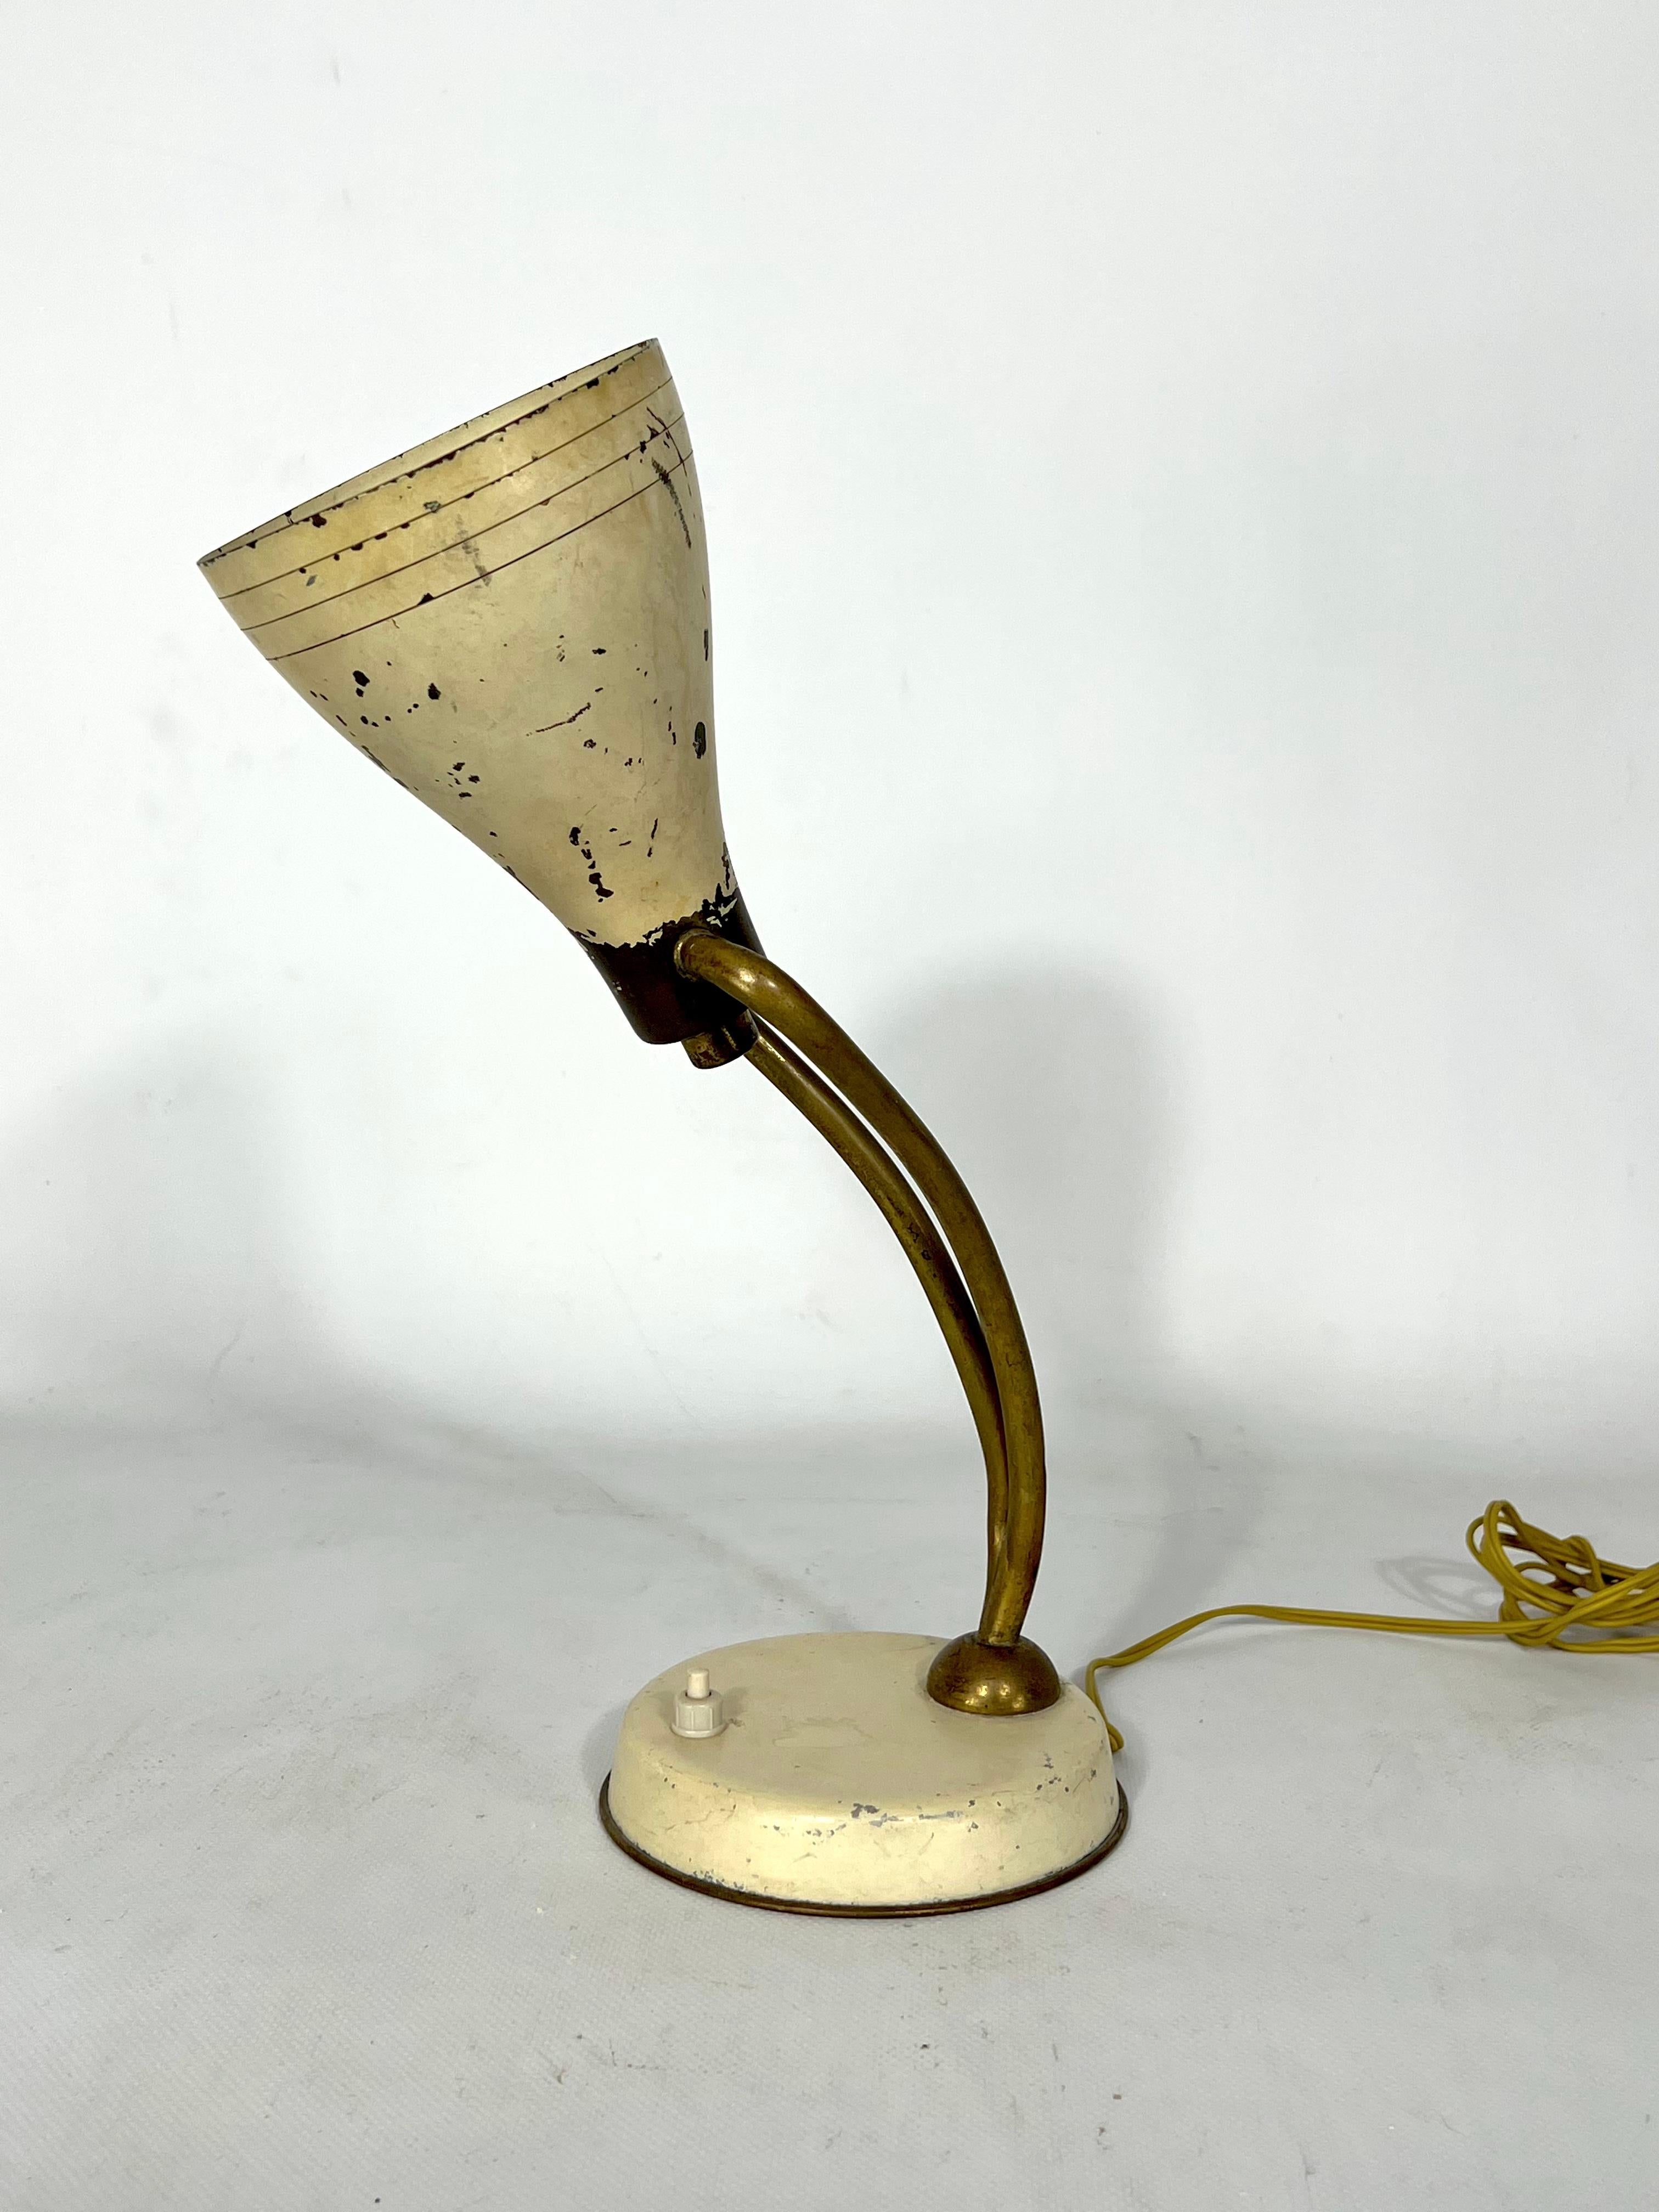 Vintage unaltered condition with evident trace of age and use for this Italian table lamp made from lacquered brass and attributed to the Italian Arredoluce Monza. Great quality of manufacturing. Full working with EU standard, adaptable on demand